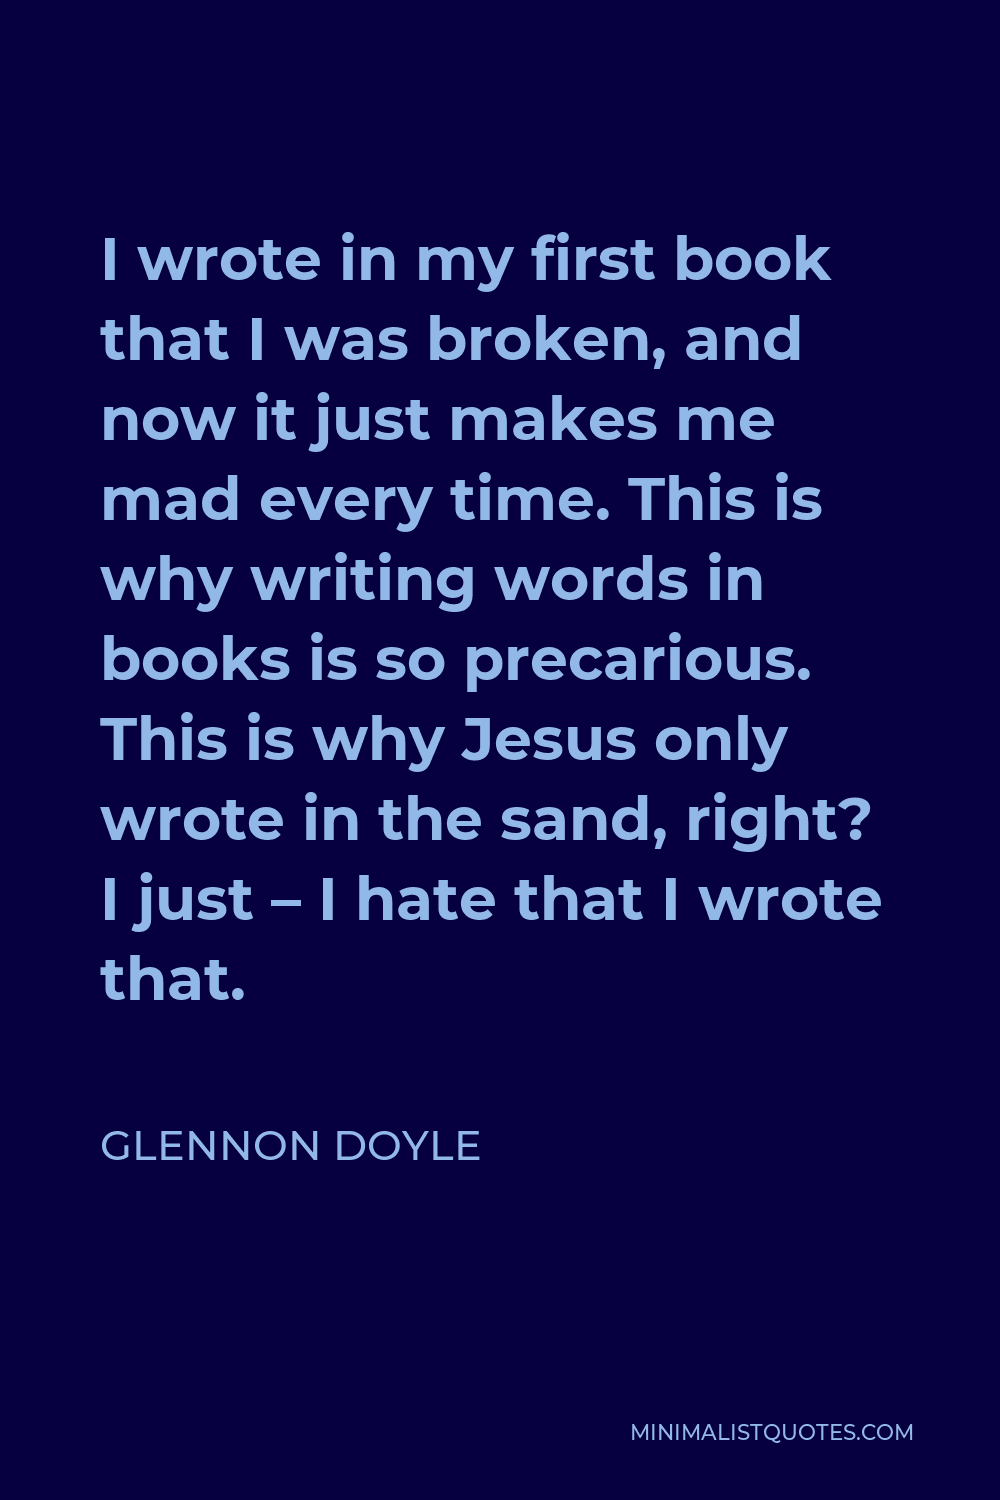 Glennon Doyle Quote - I wrote in my first book that I was broken, and now it just makes me mad every time. This is why writing words in books is so precarious. This is why Jesus only wrote in the sand, right? I just – I hate that I wrote that.